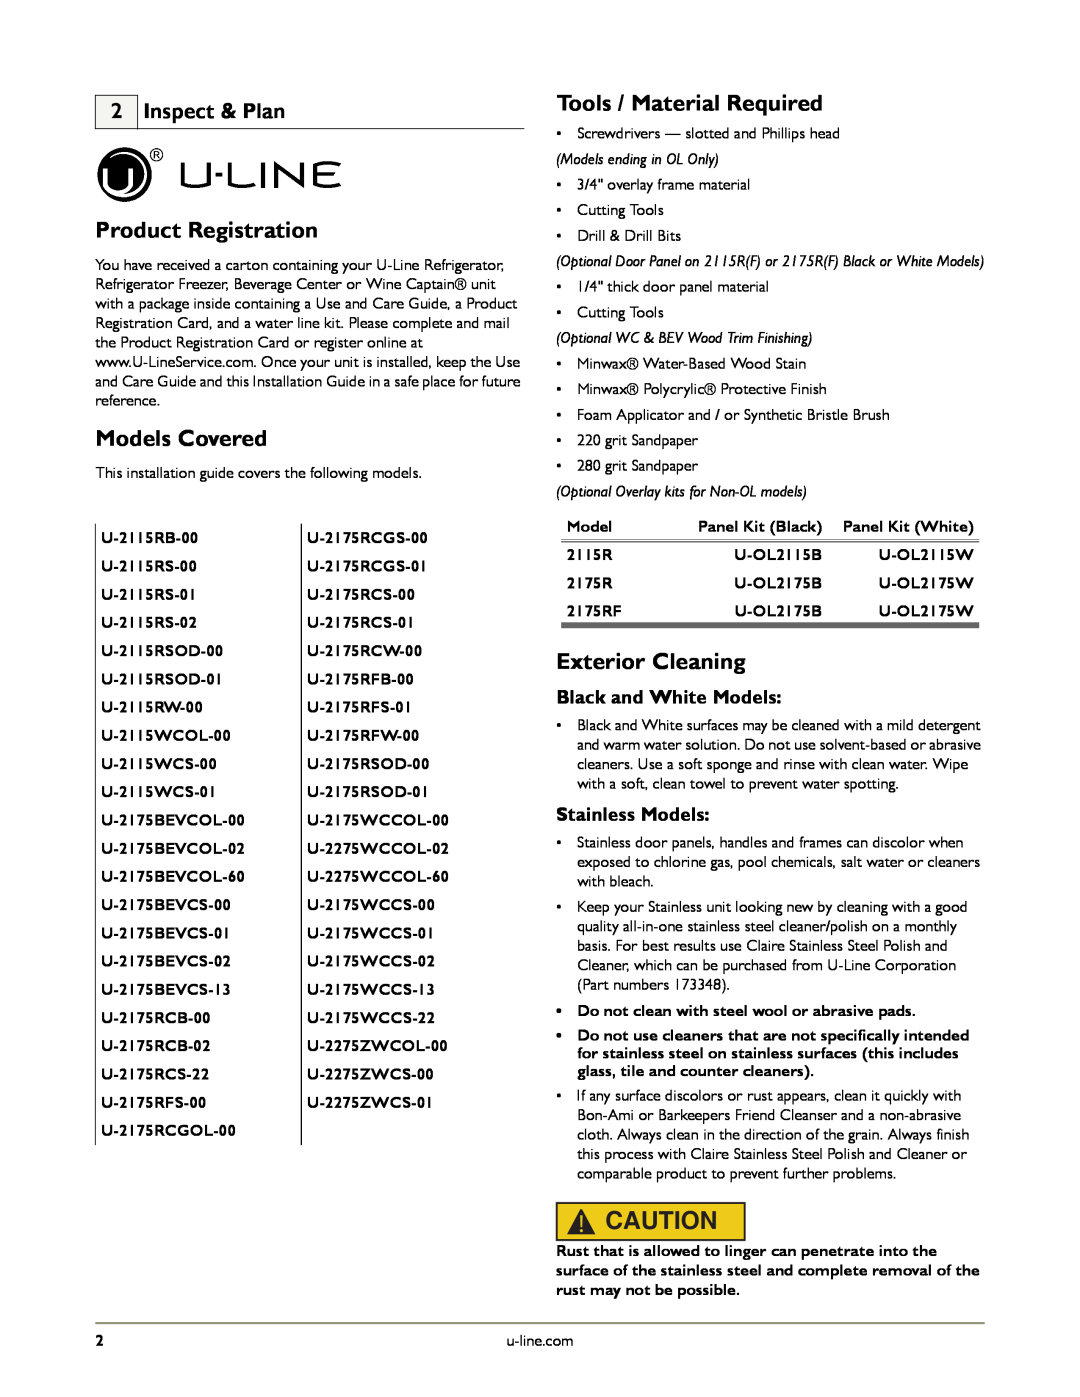 U-Line U-2175RSOD-01 Product Registration, Models Covered, Tools / Material Required, Exterior Cleaning, Inspect & Plan 